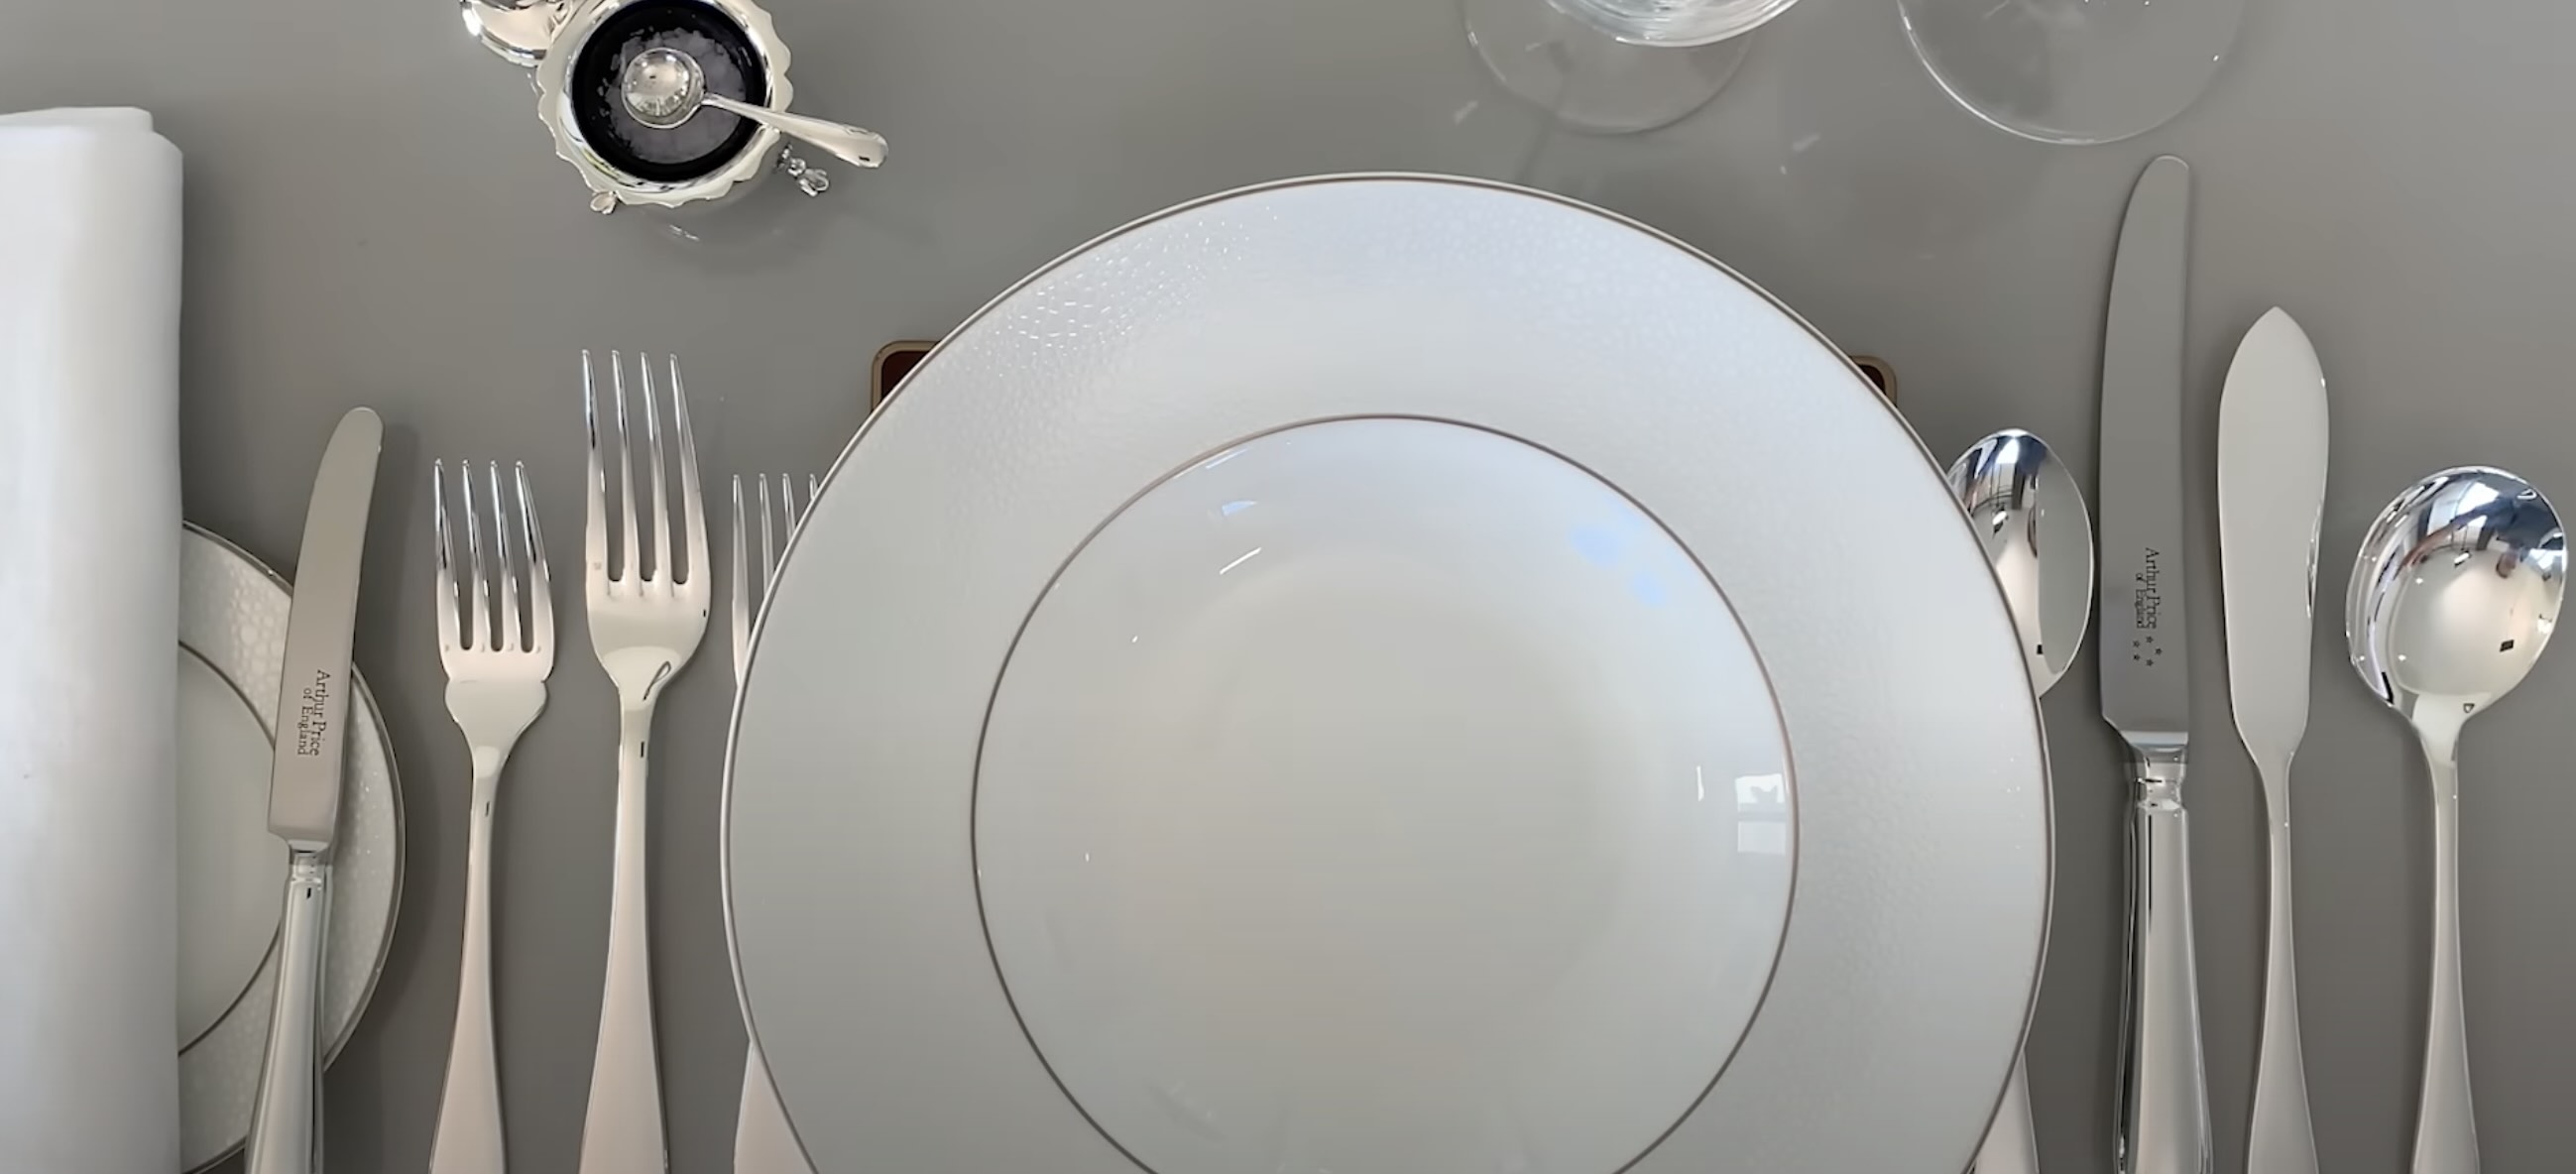 What Are Table Settings